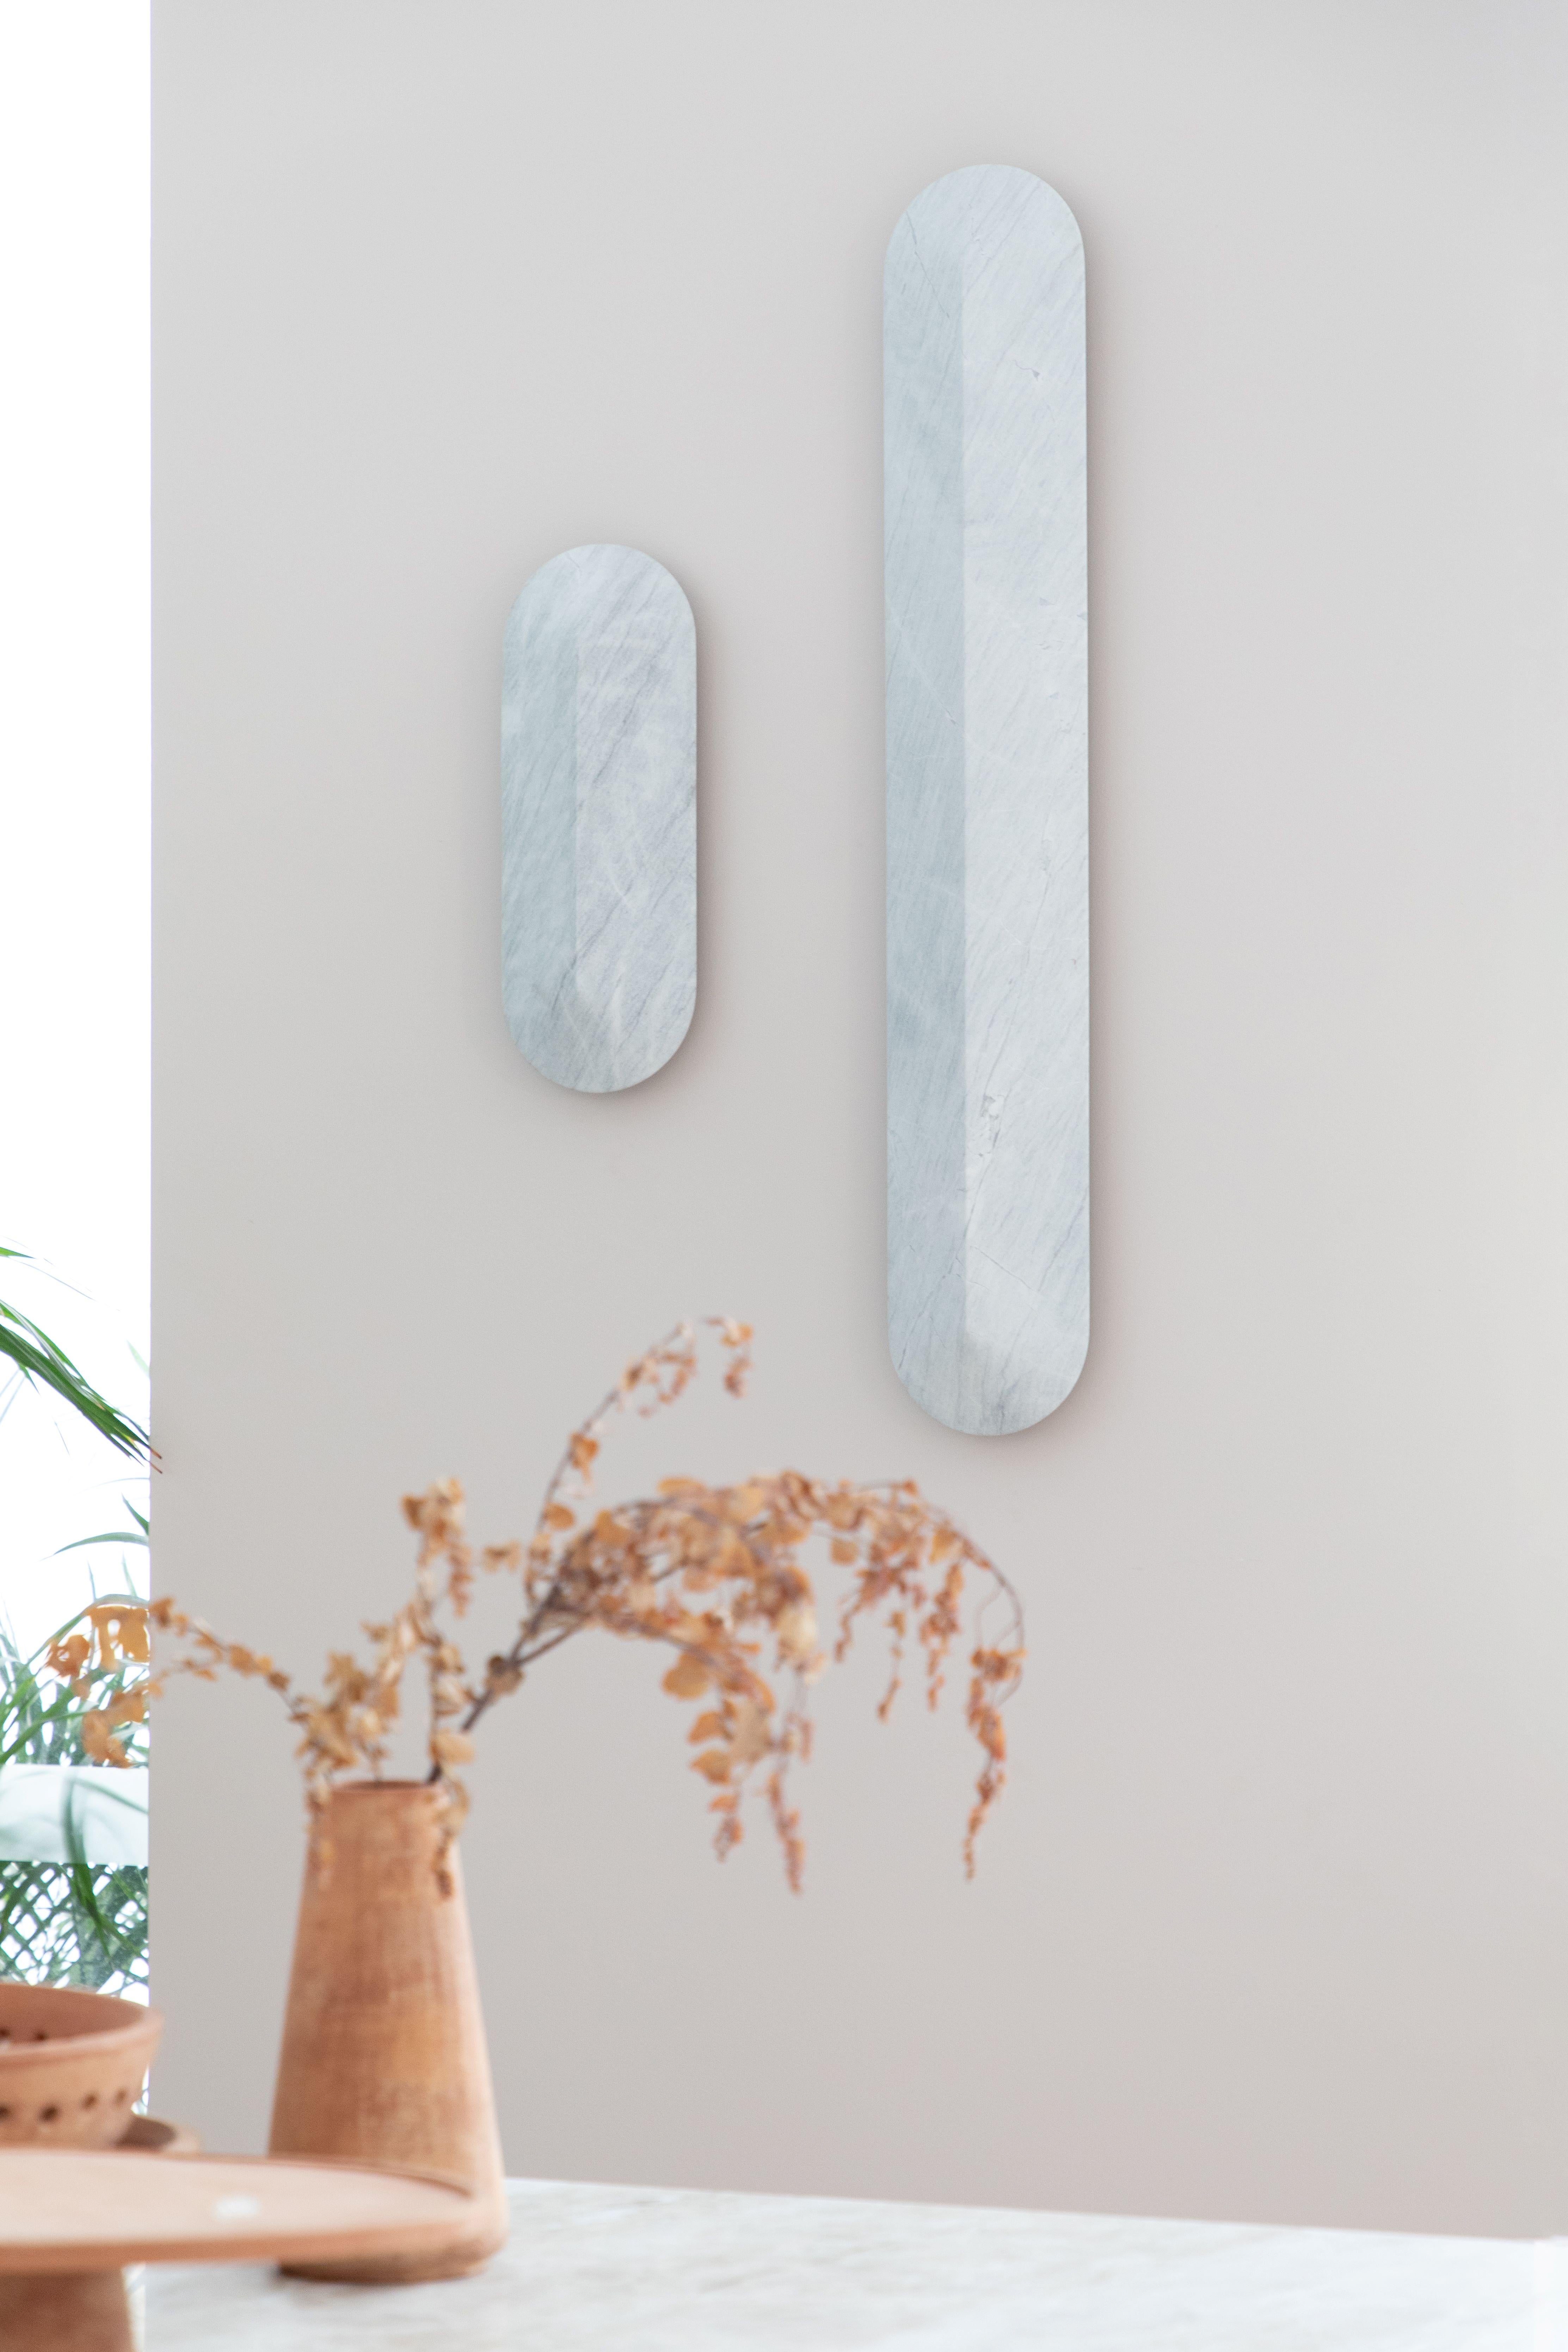 An elegant, elongated wall light, offered in two lengths – 400 millimetres and 900 millimetres. Its shield-like form is characterised by a central sharp line or ‘pinch’ that allows light to fall differently on each side of the Elba, accentuating the